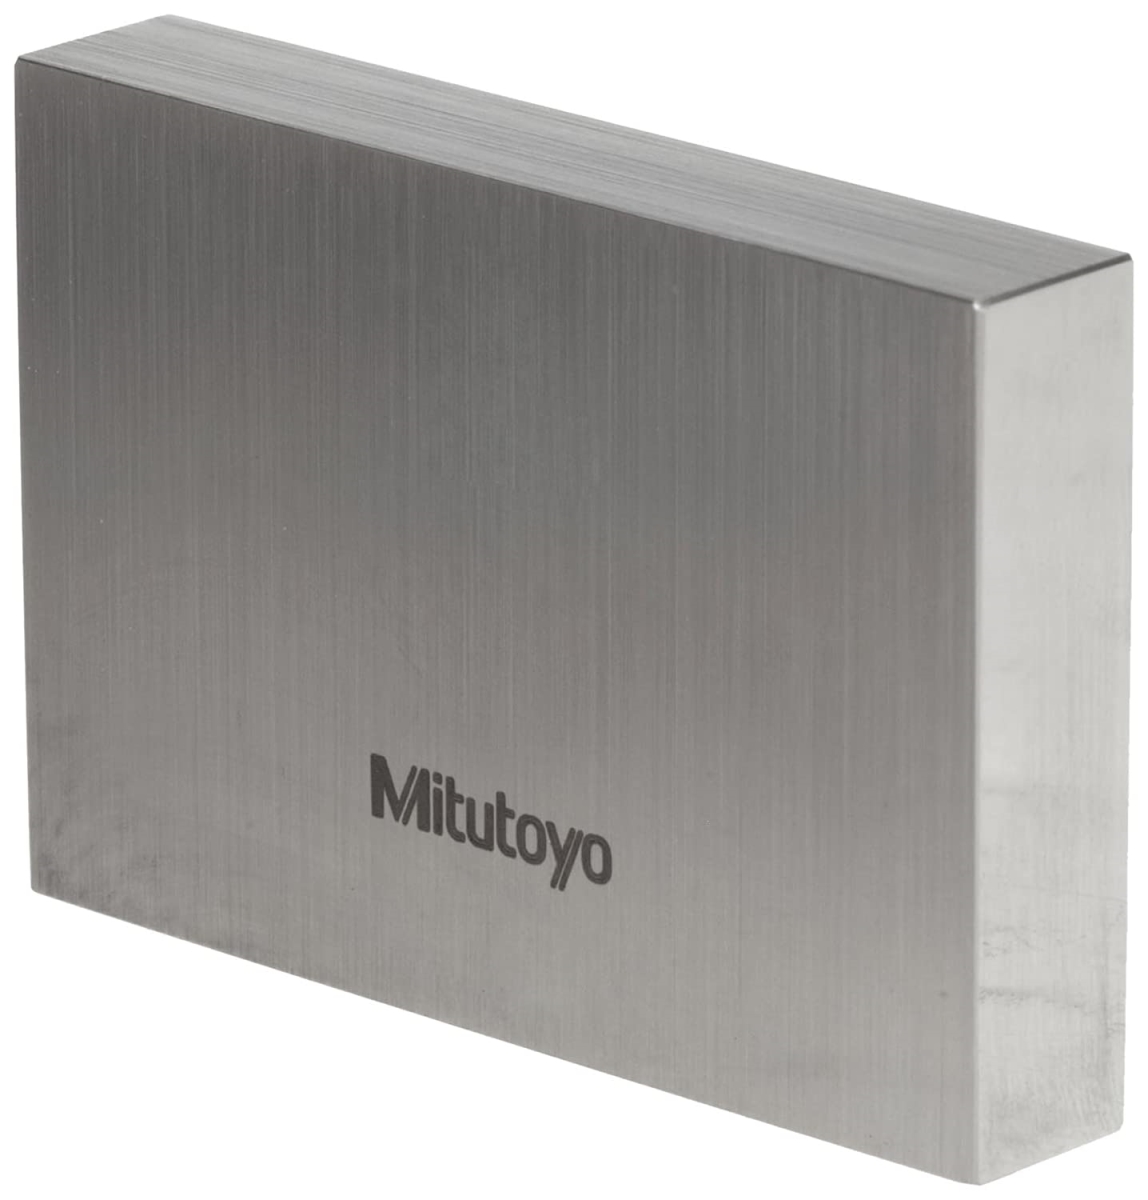 Picture of Mitutoyo 611215-531 0.55 in. Rectangular Steel AS-0 Gage Block